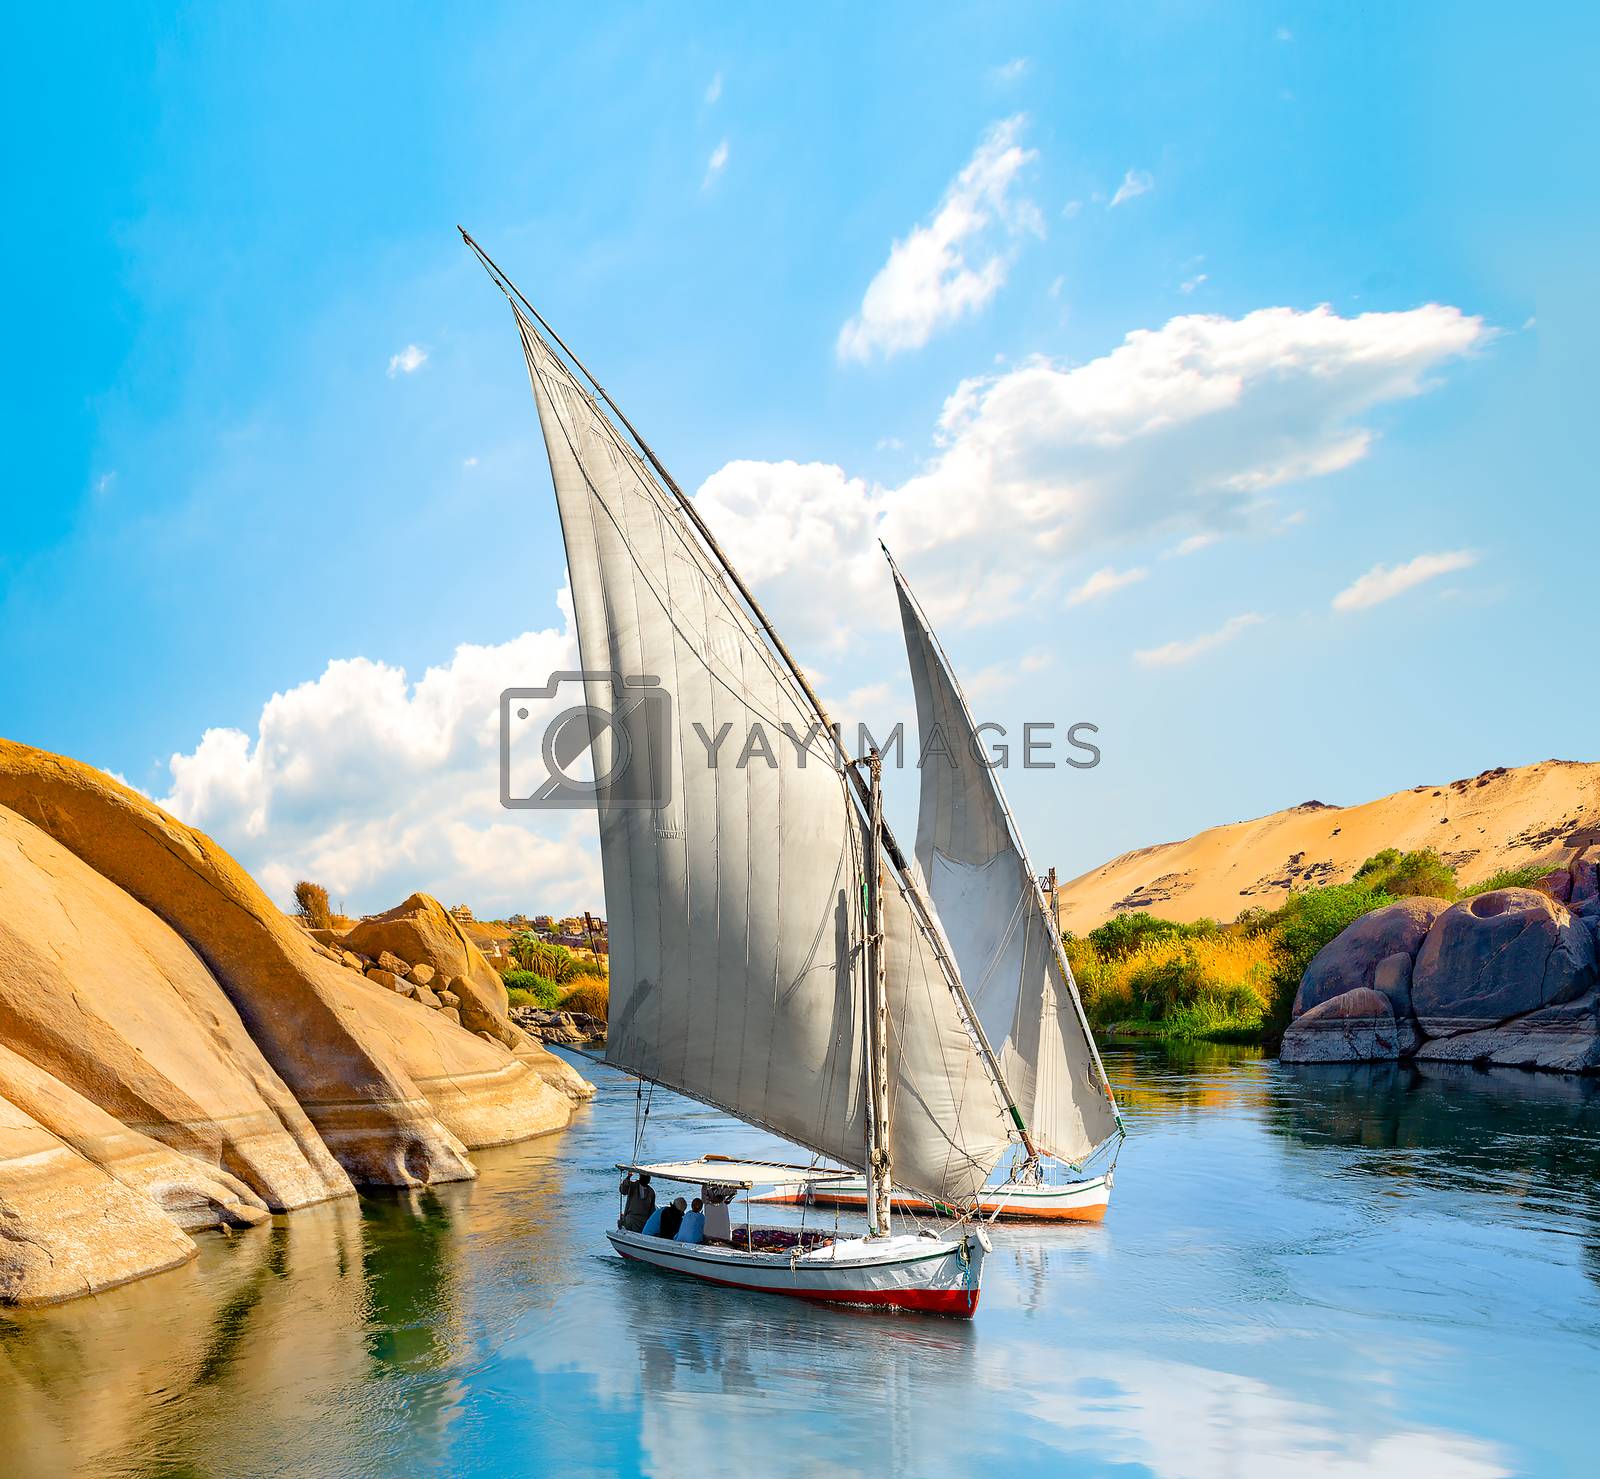 Royalty free image of Felucca on the Nile by Givaga